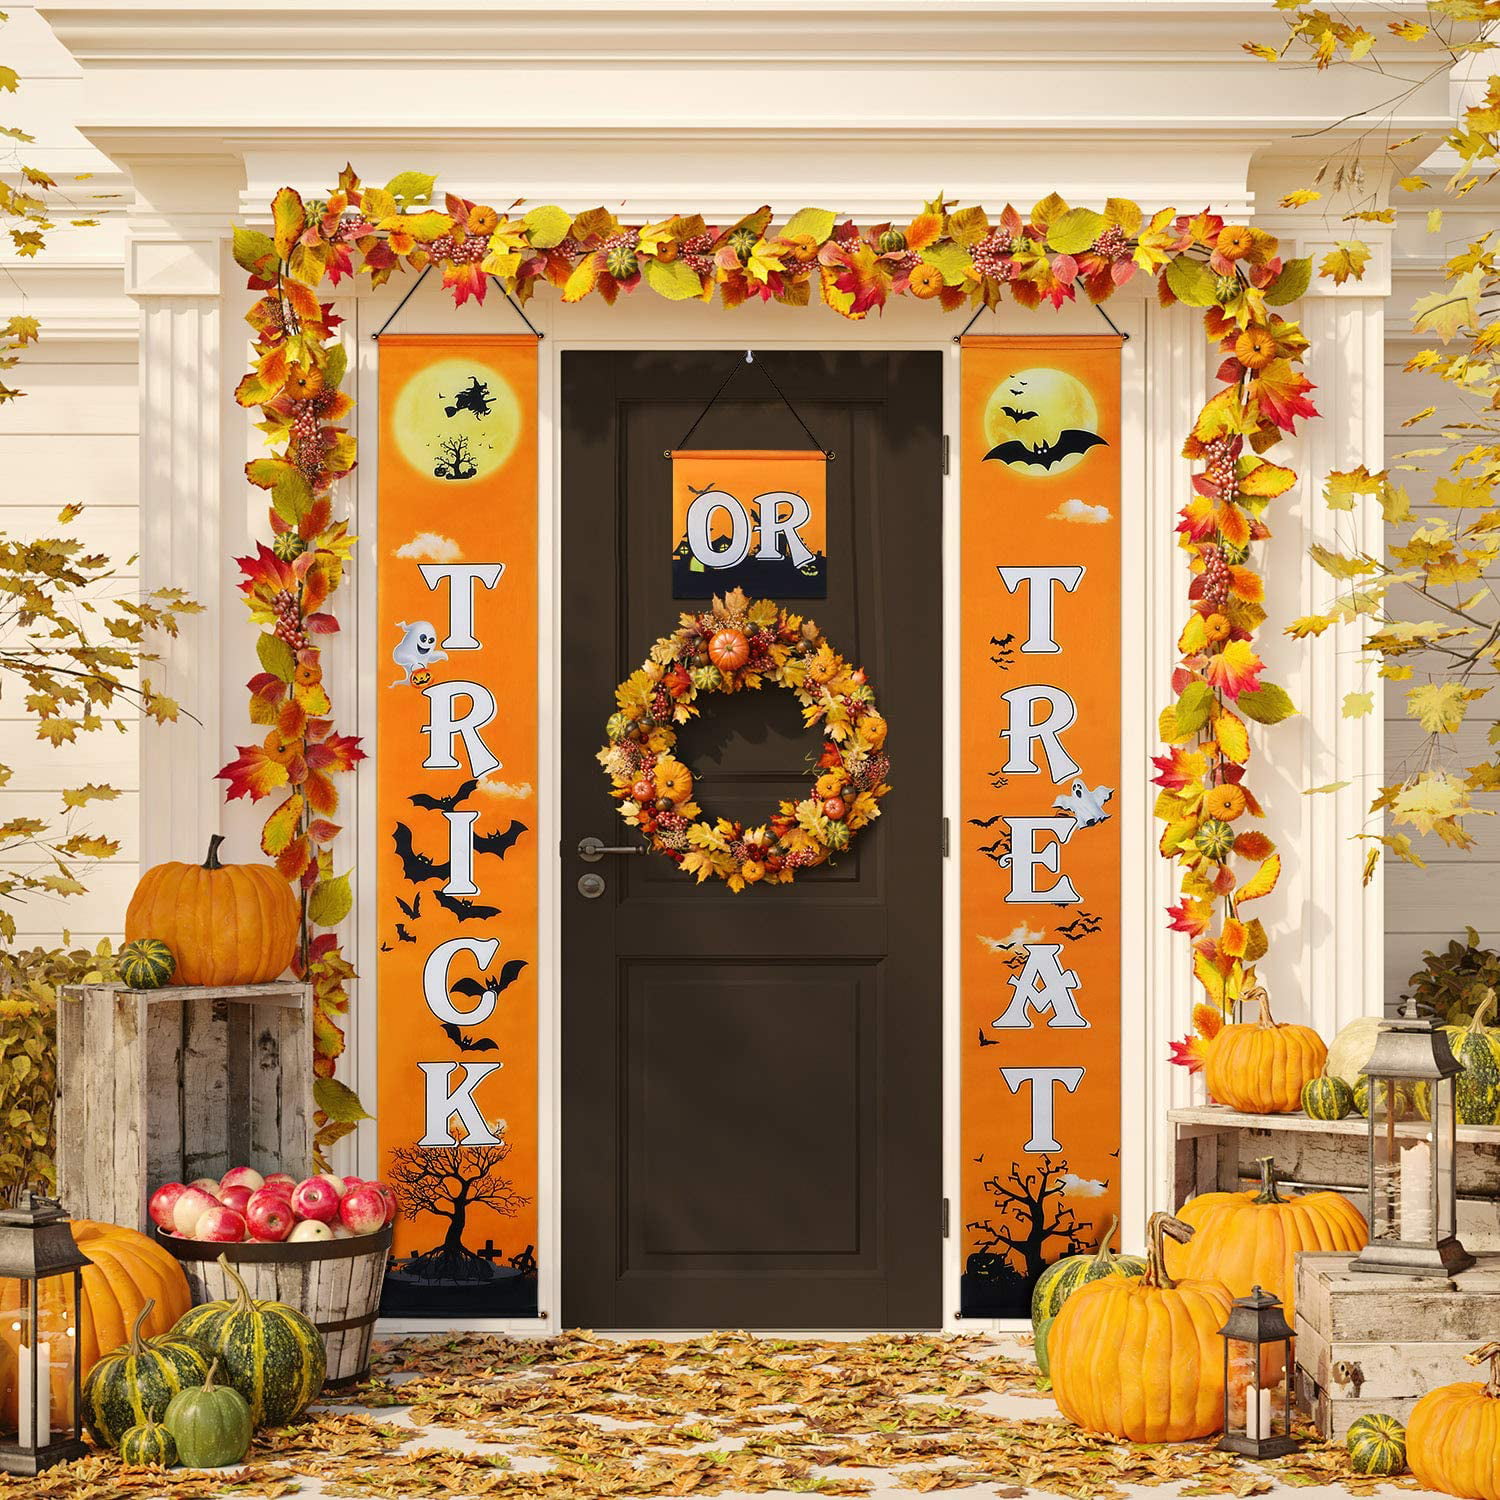 Details about   RIFFUE Halloween Decorations Outdoor Trick or Treat Halloween Porch Signs for 